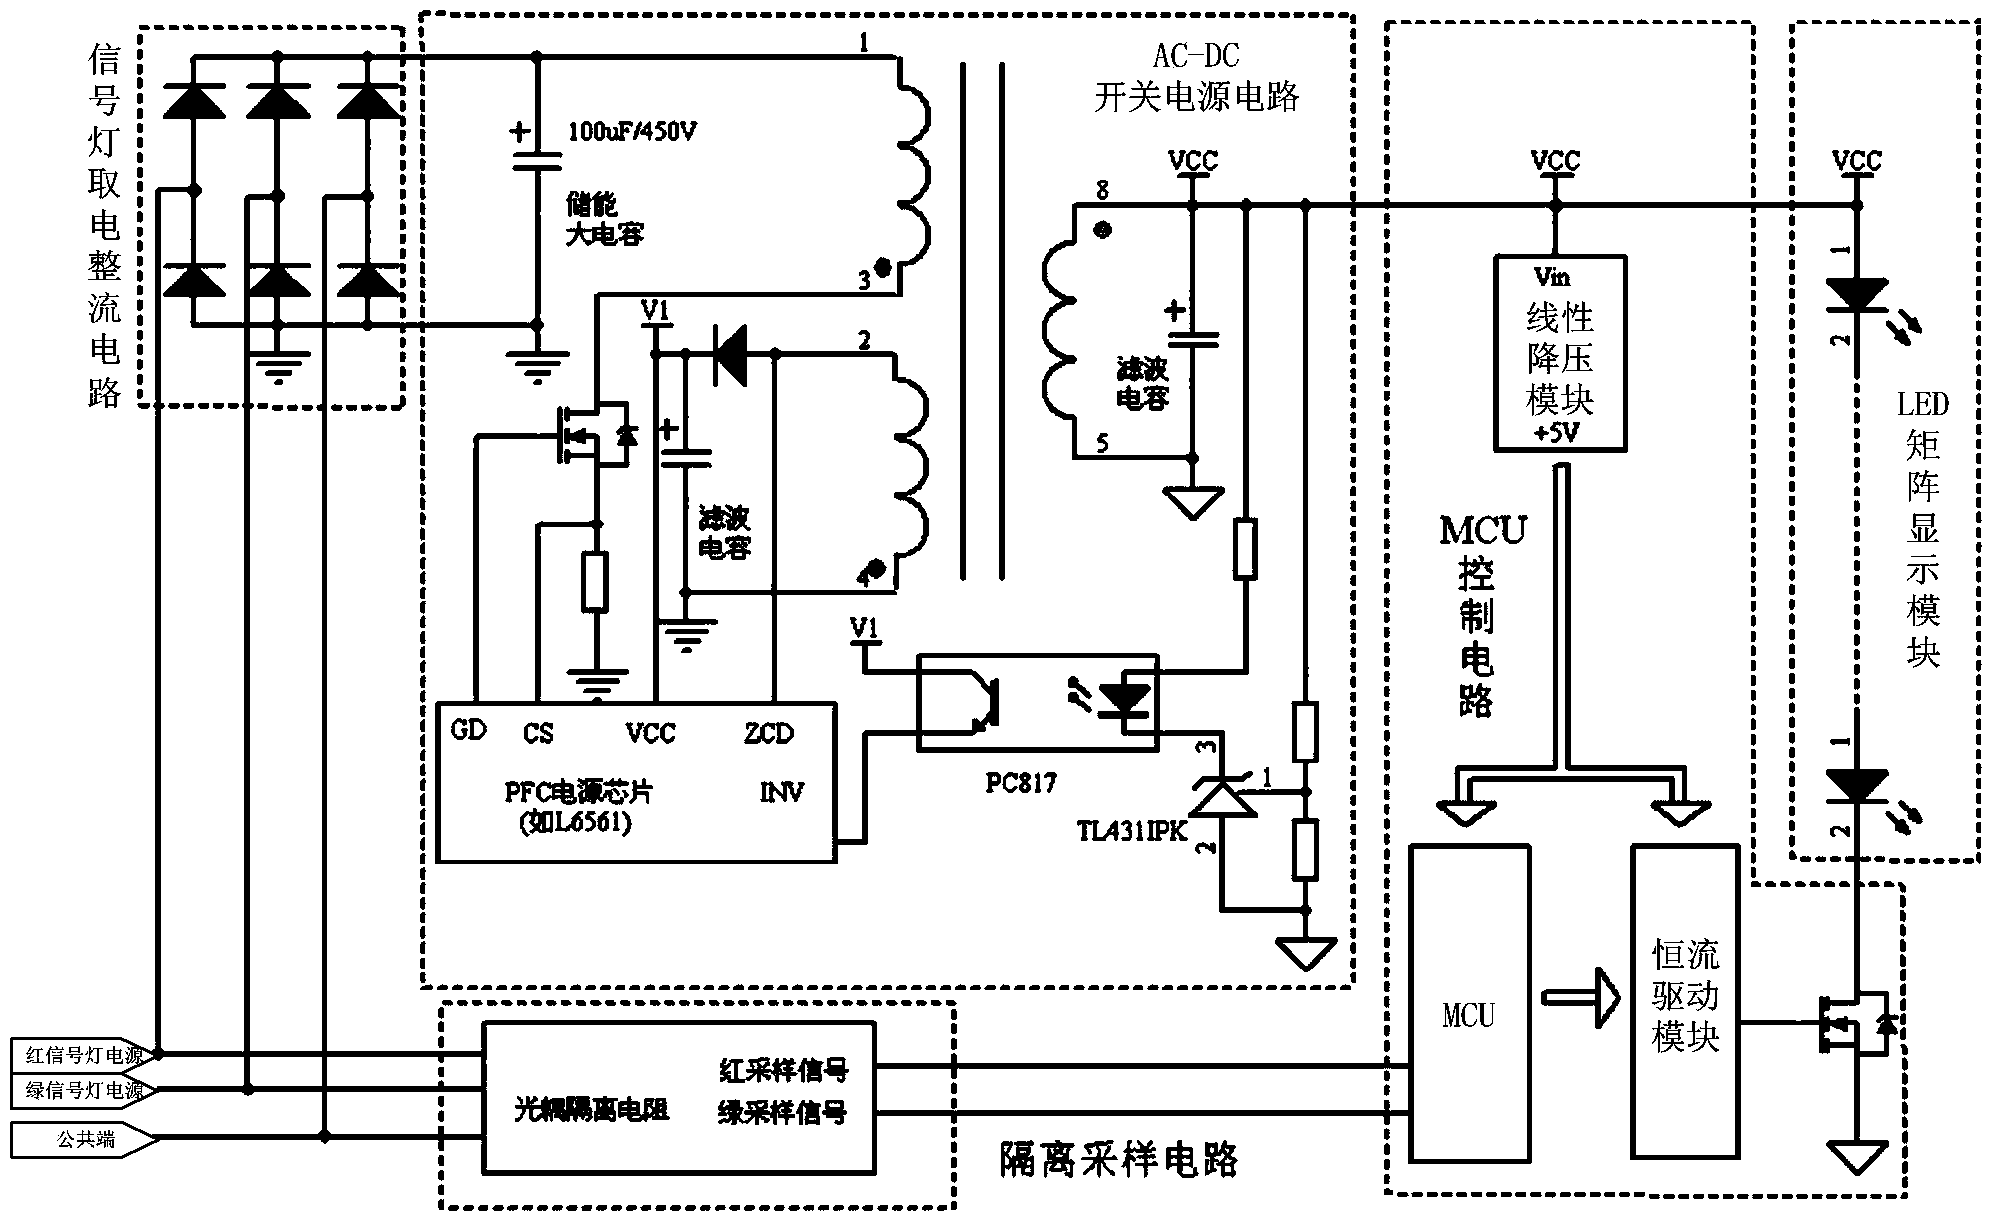 Low-impact-current high-power-factor energy storage type countdown display circuit